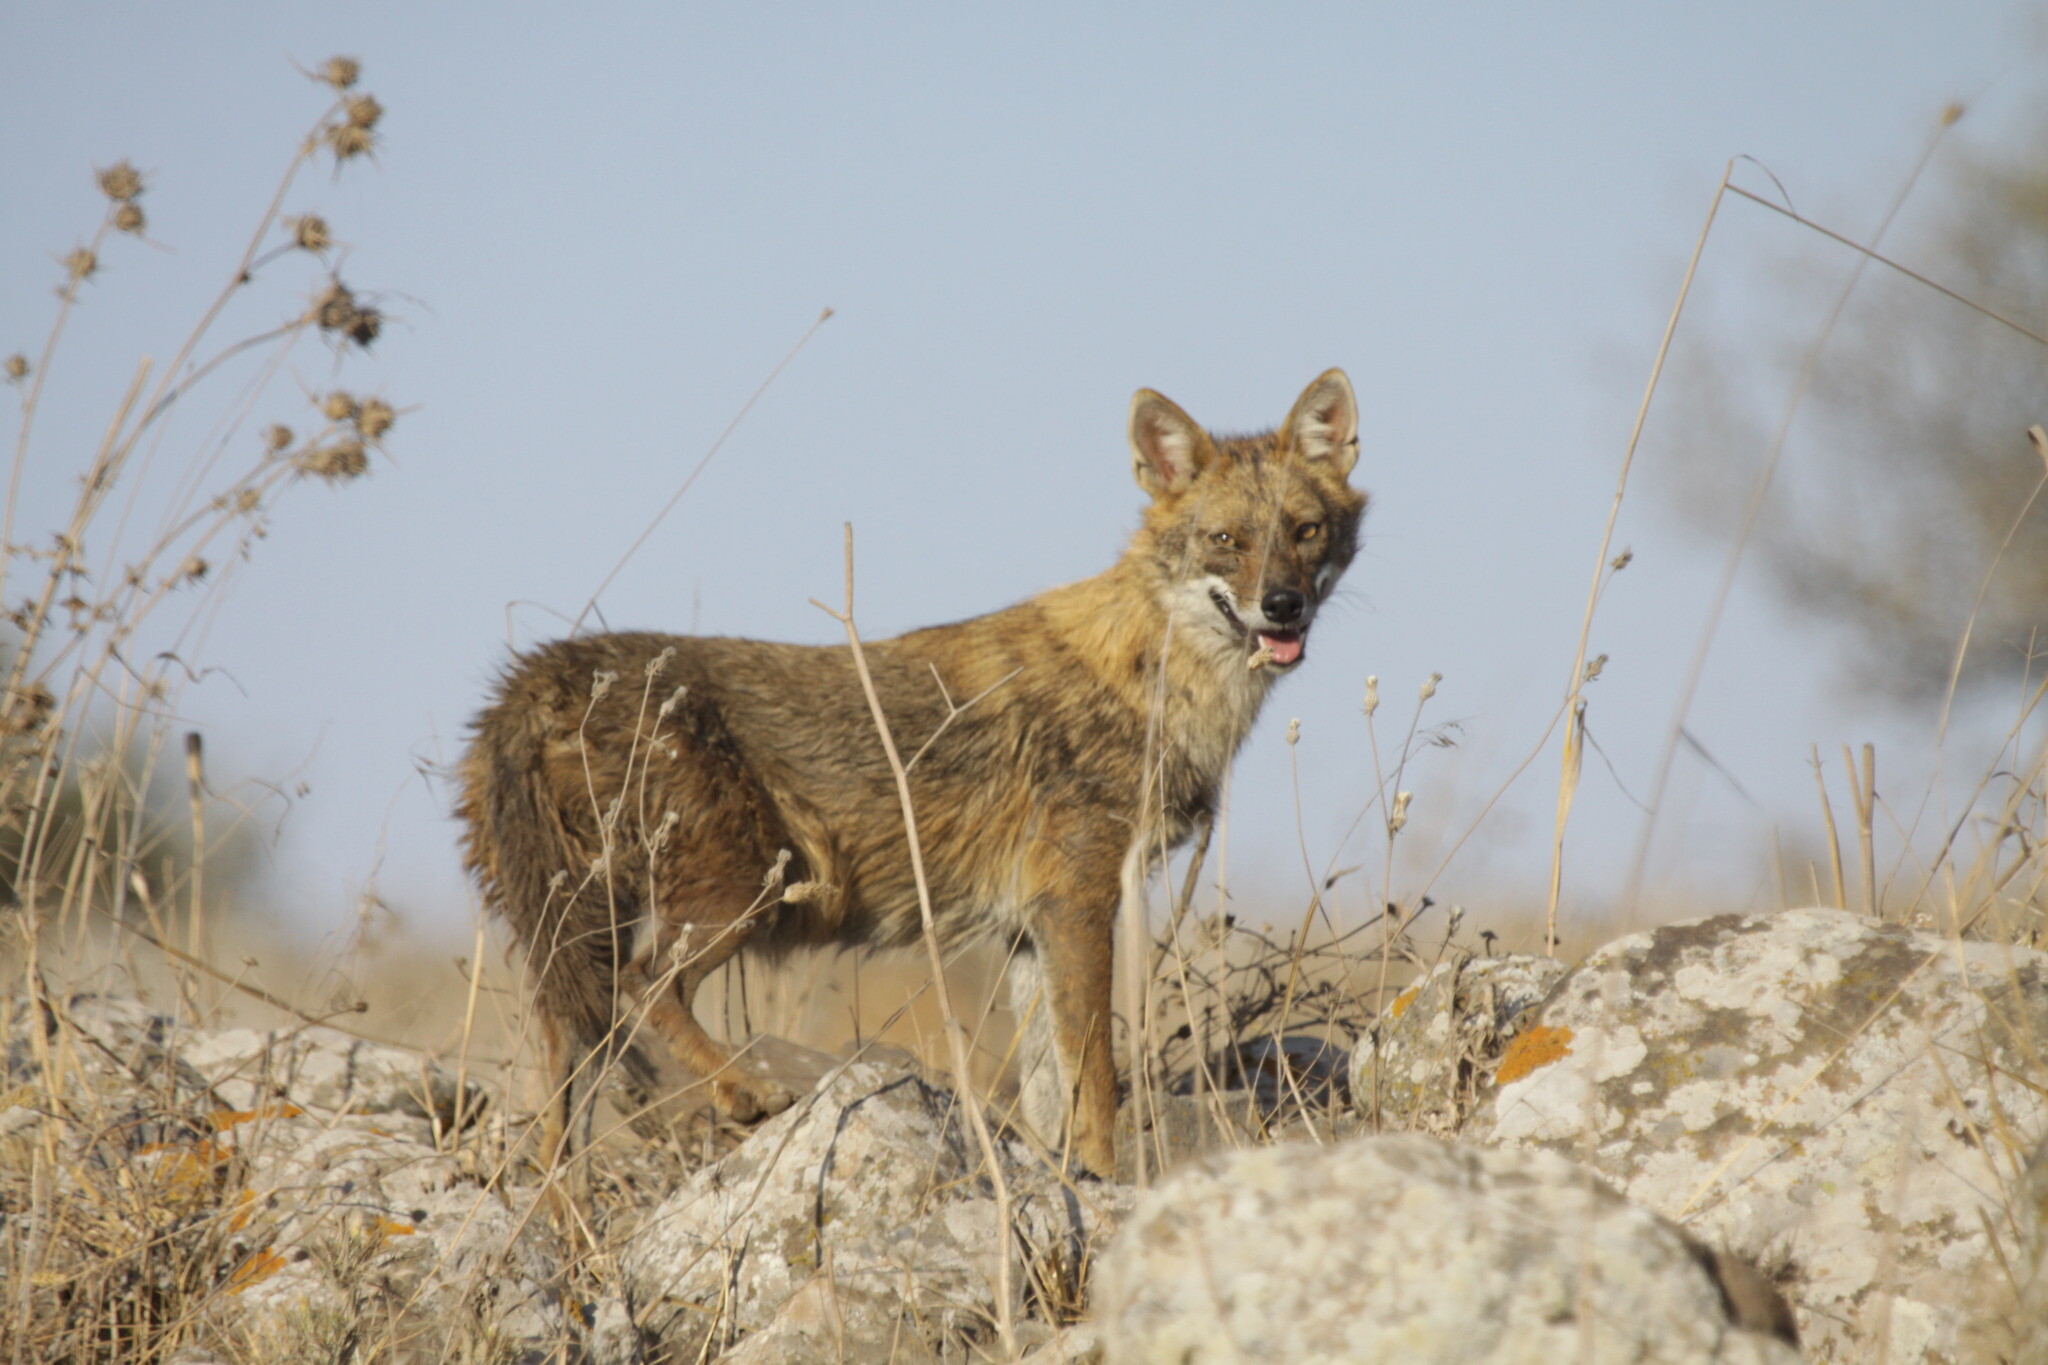 Snacks for stray cats may be feeding a rash of jackal attacks | The Times  of Israel